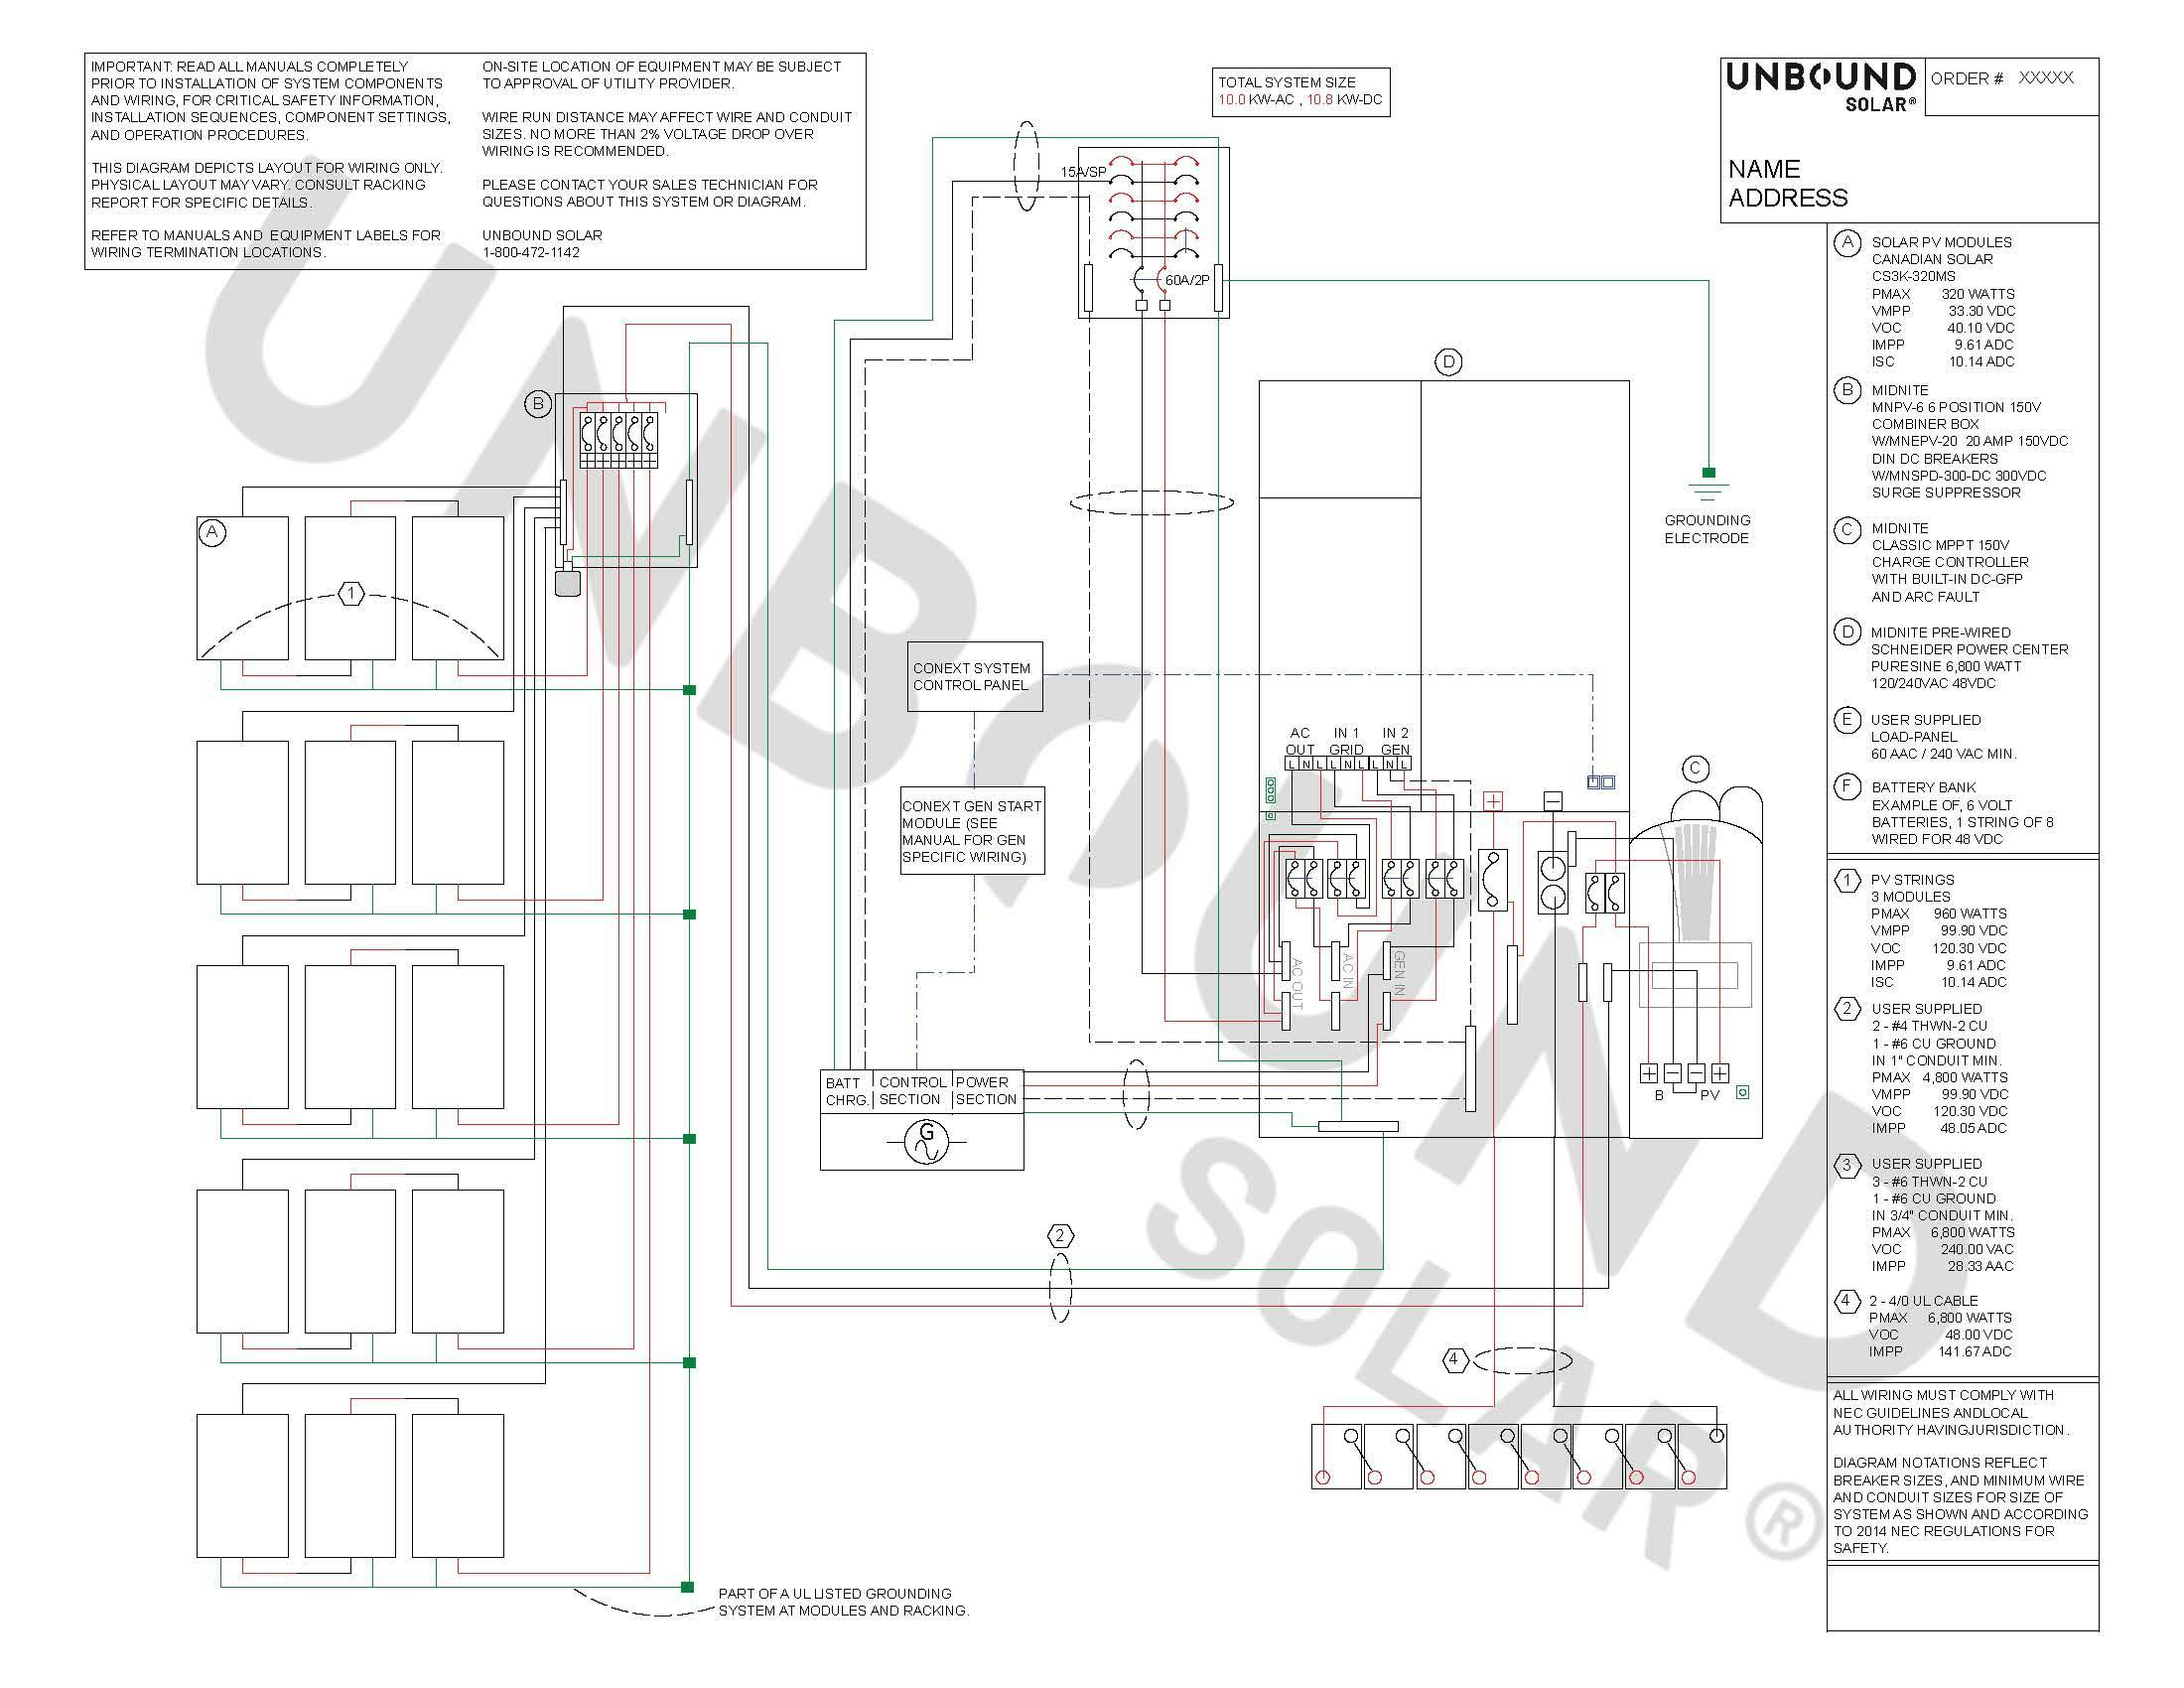 Electrical Wiring Diagrams From Unbound